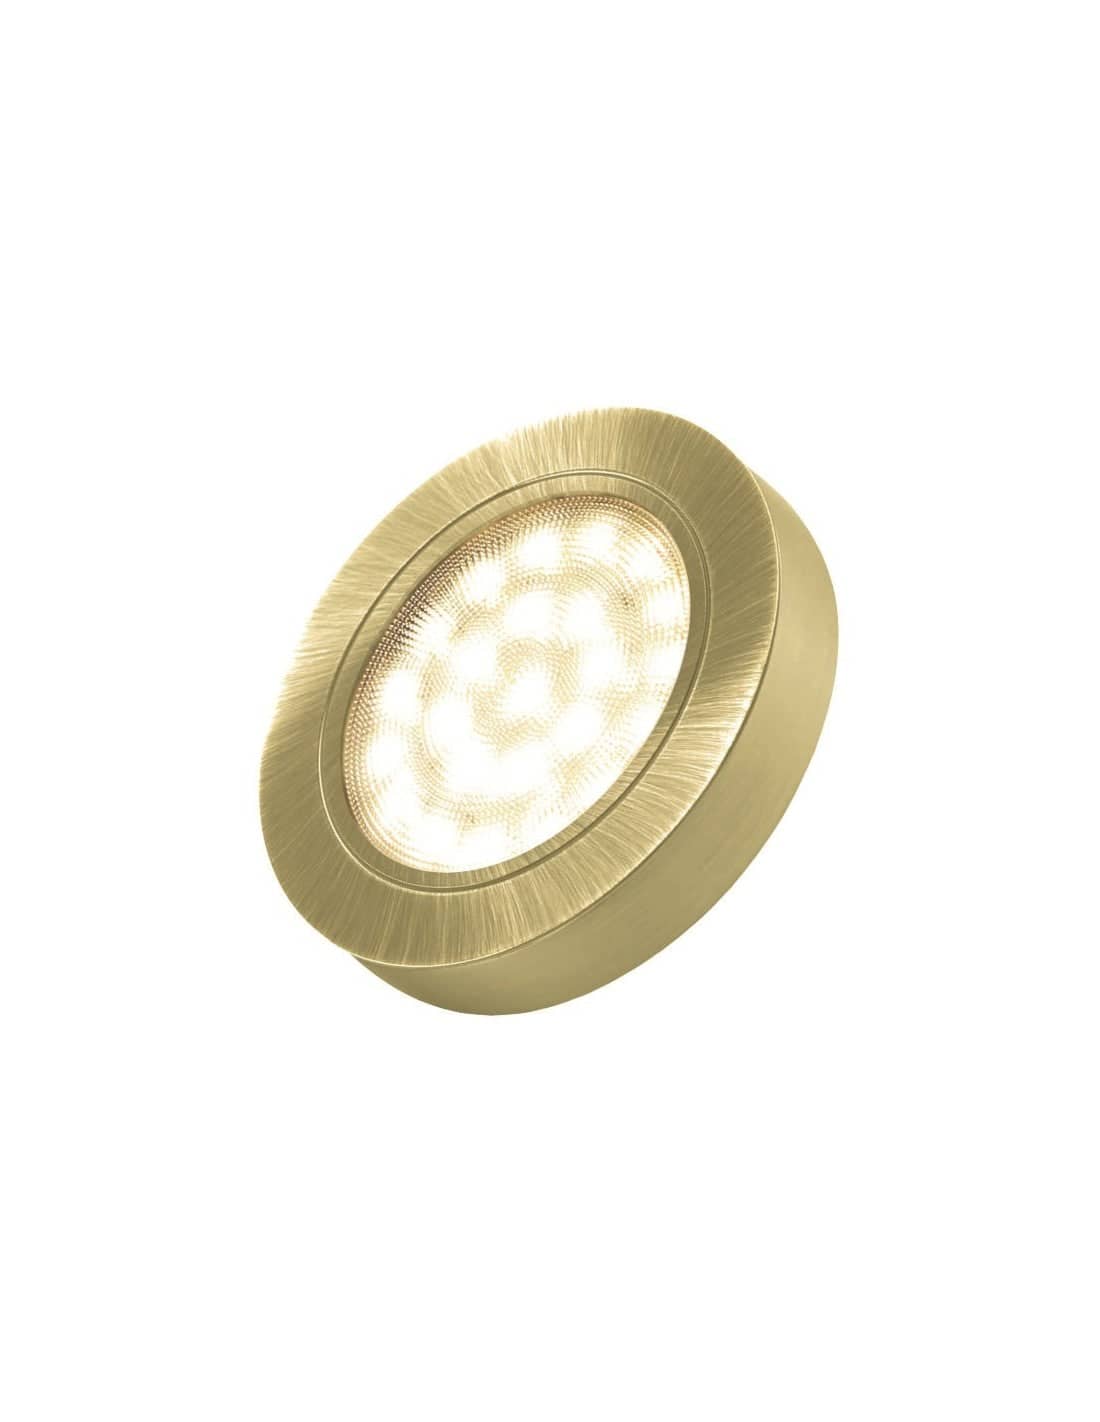 Oval Surface Mount LED Luminaire 2W Gold Neutral White 40K   OVAL-2W-ZL-DY-40K-01